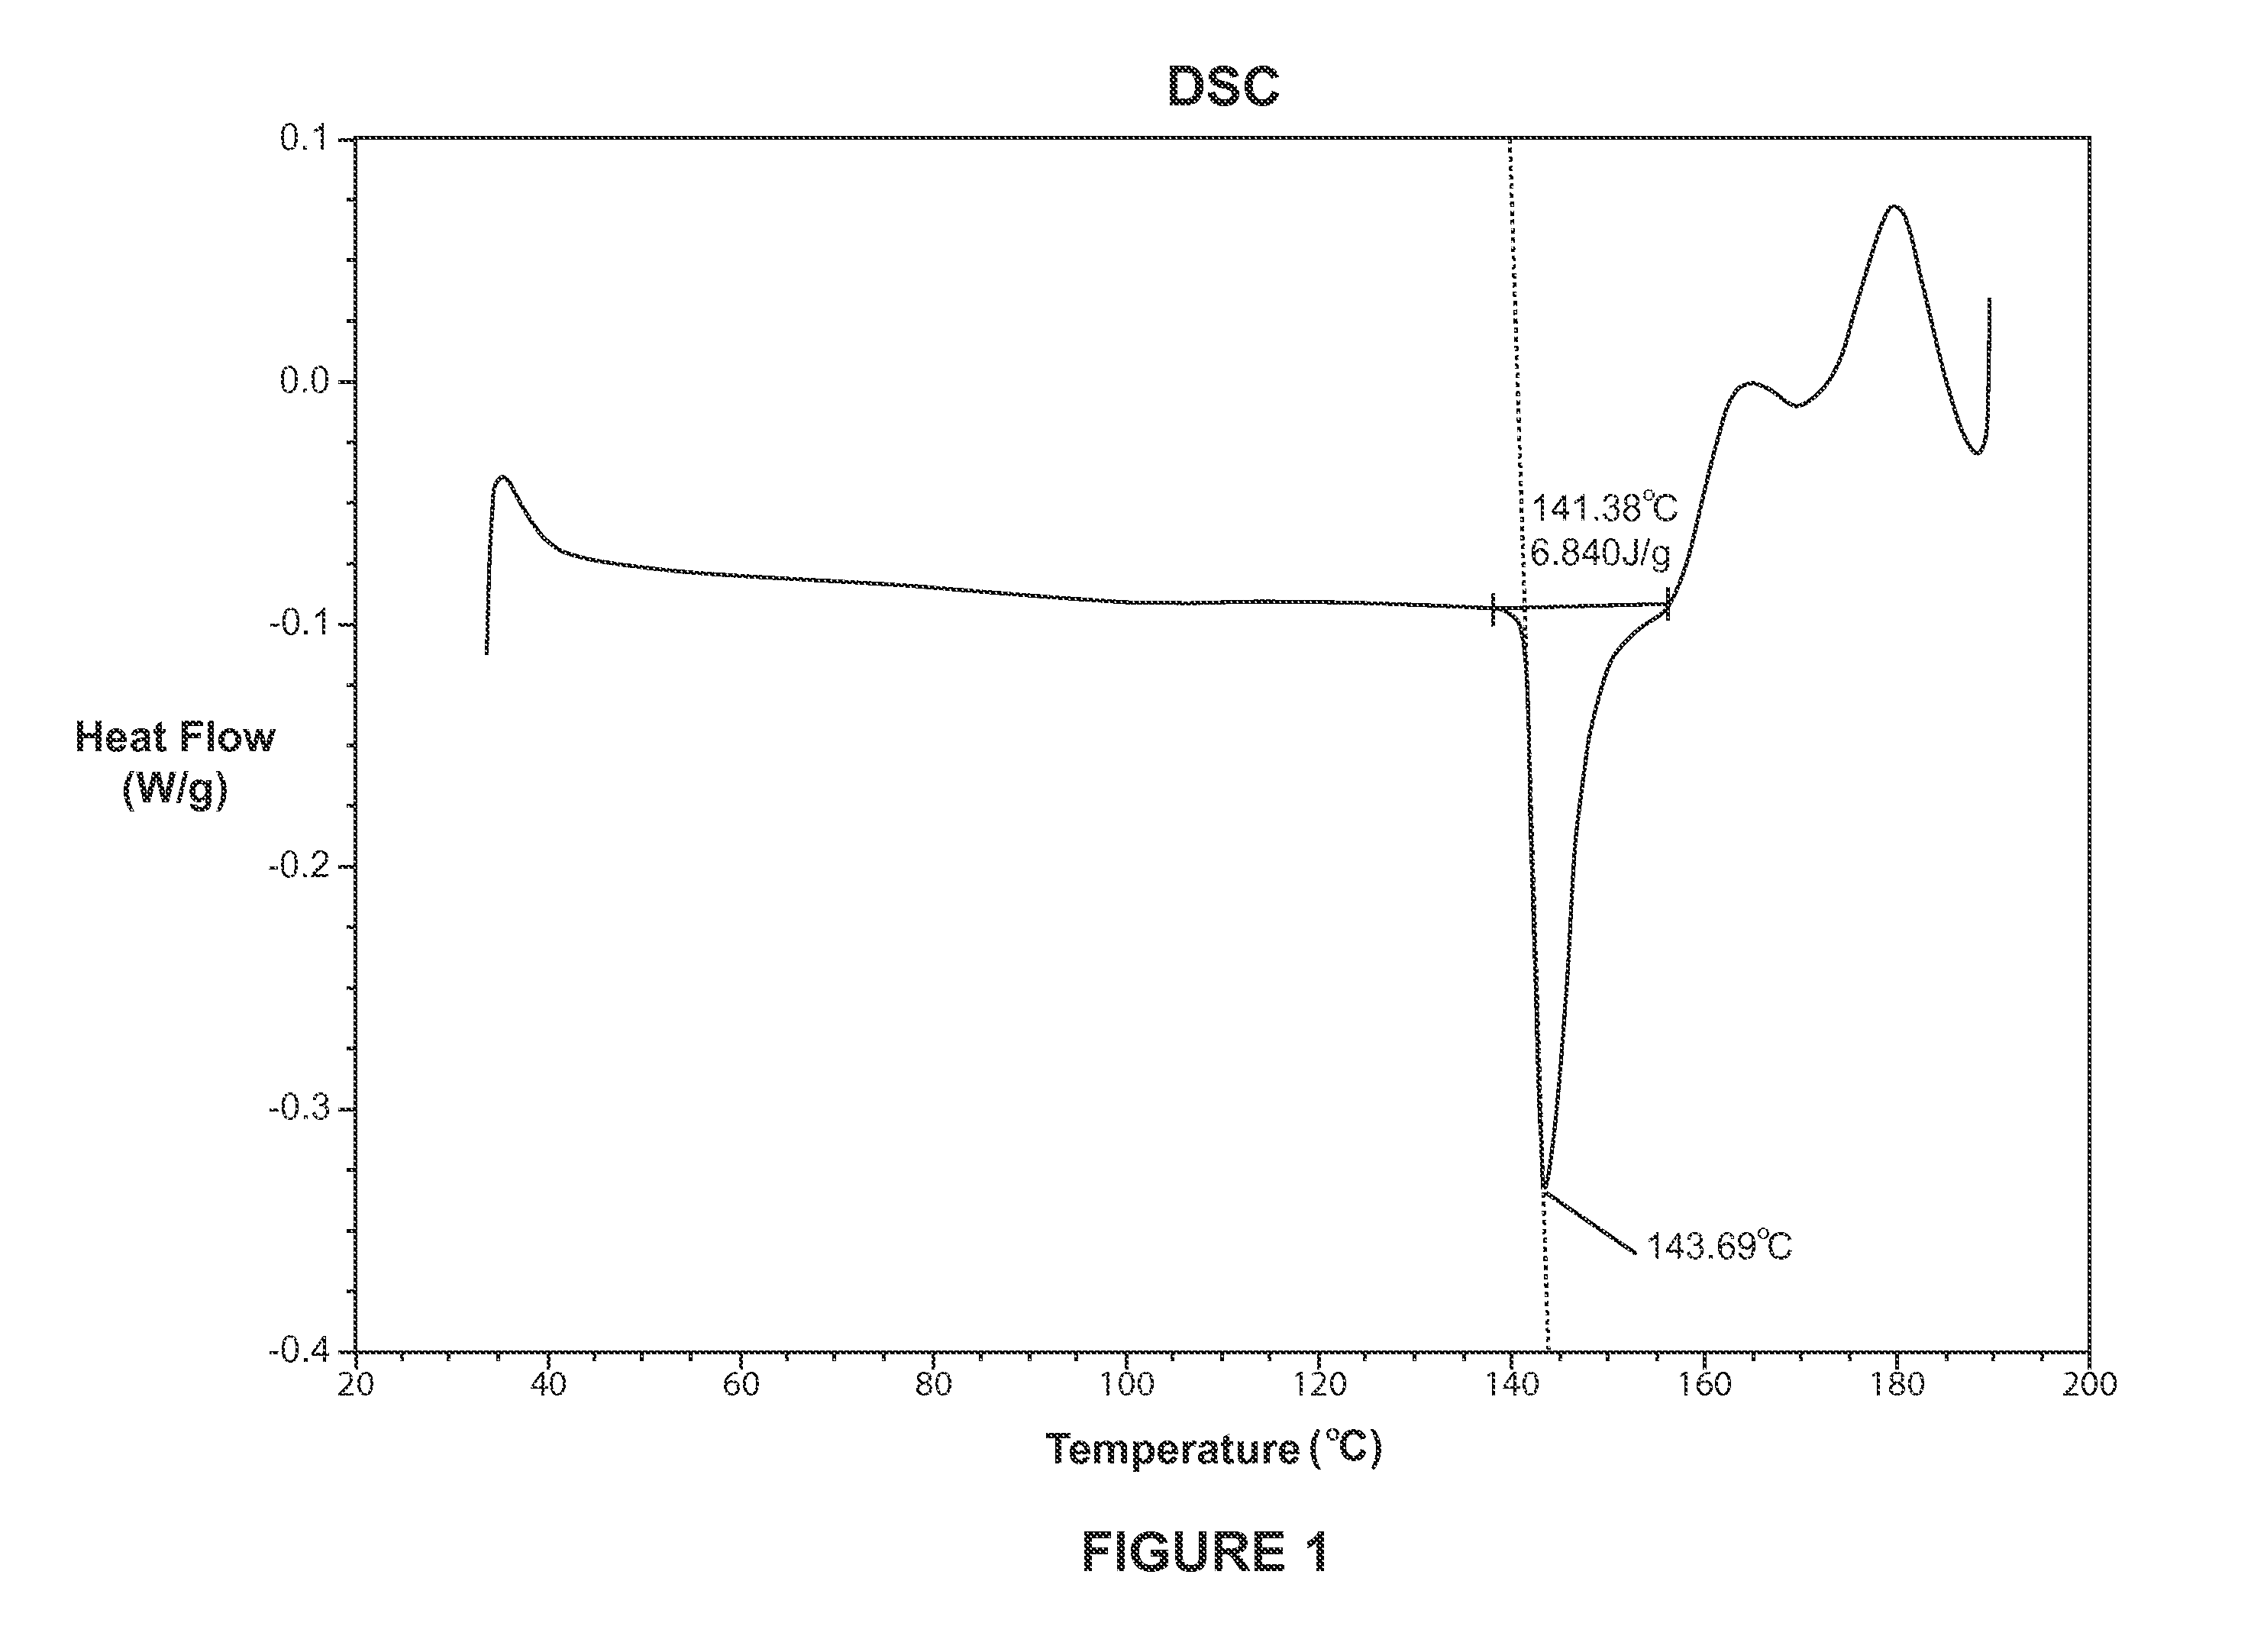 Conductive compositions containing blended alloy fillers